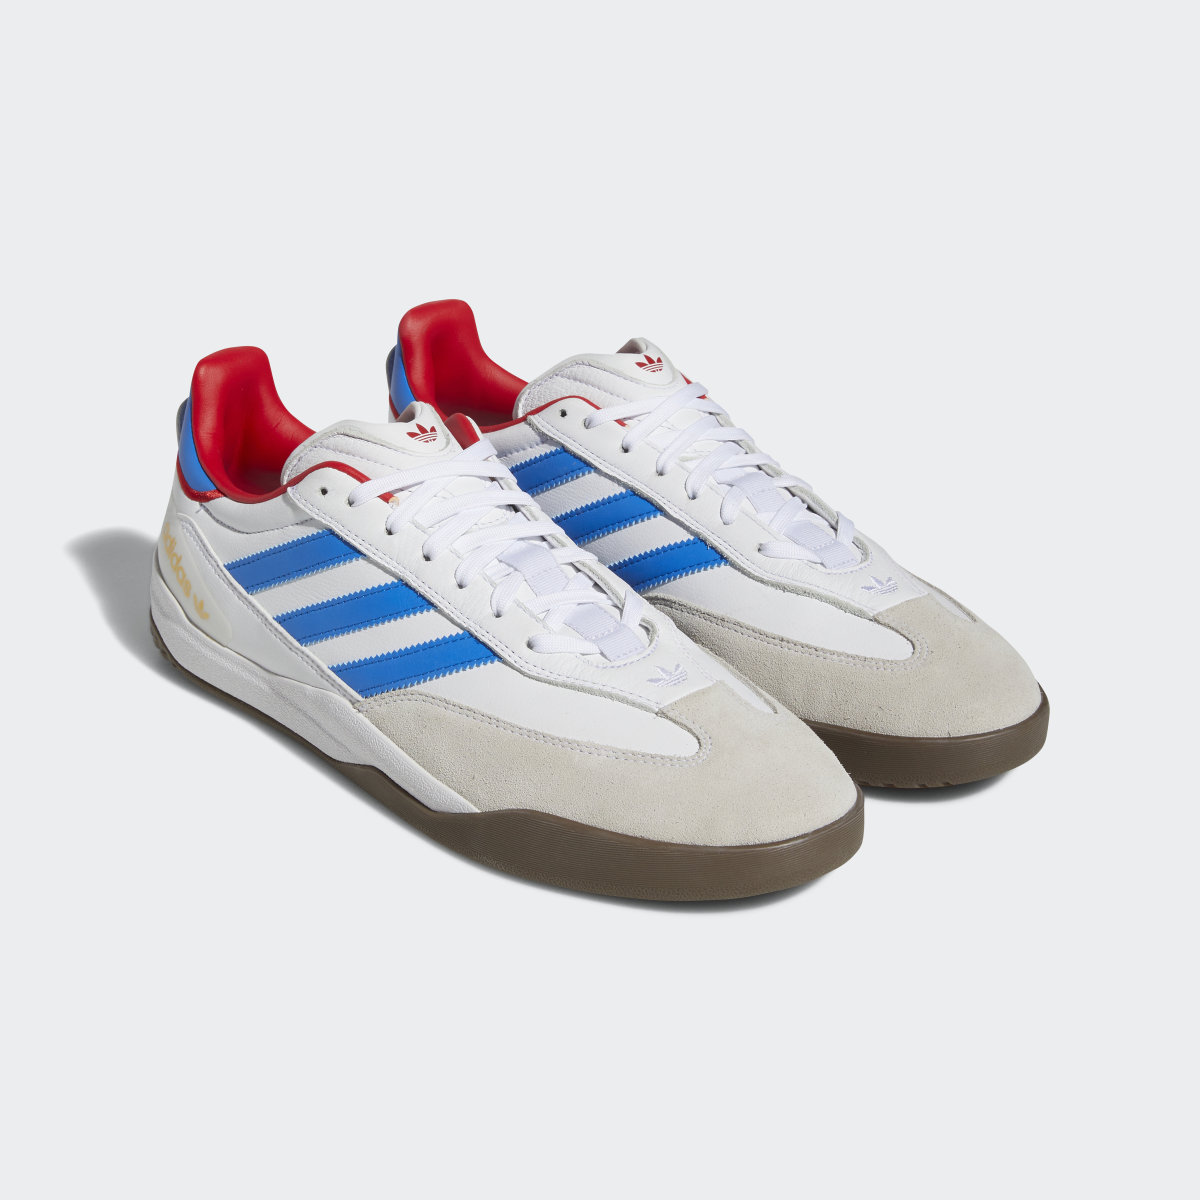 Adidas Copa Nationale Shoes. 4